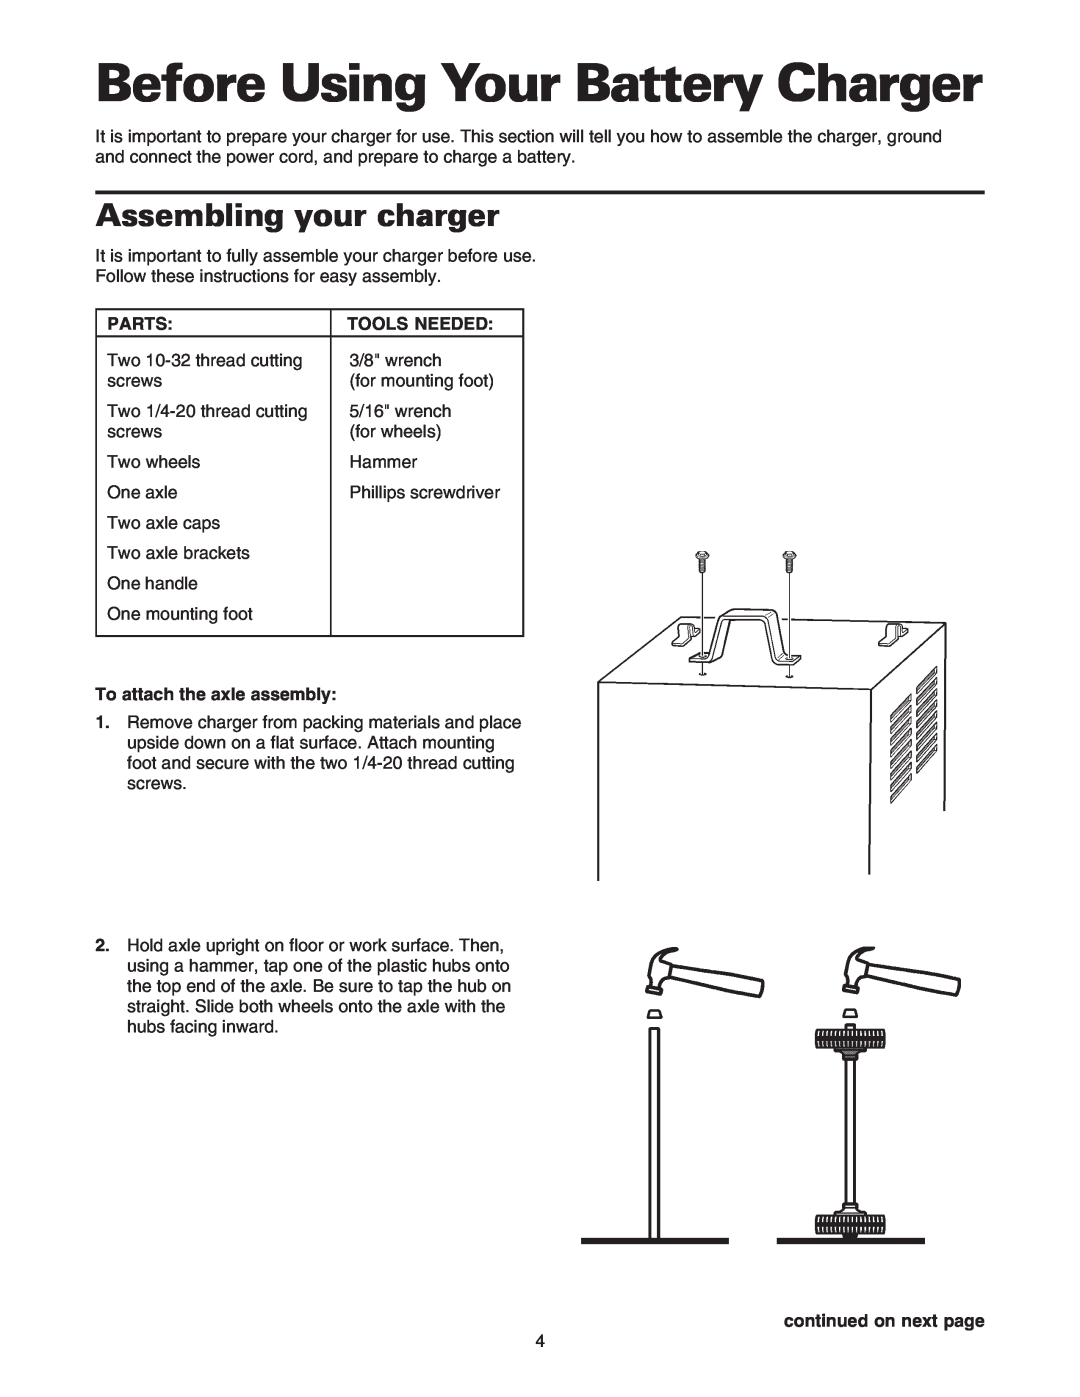 Sears 200.71231 owner manual Before Using Your Battery Charger, Assembling your charger 